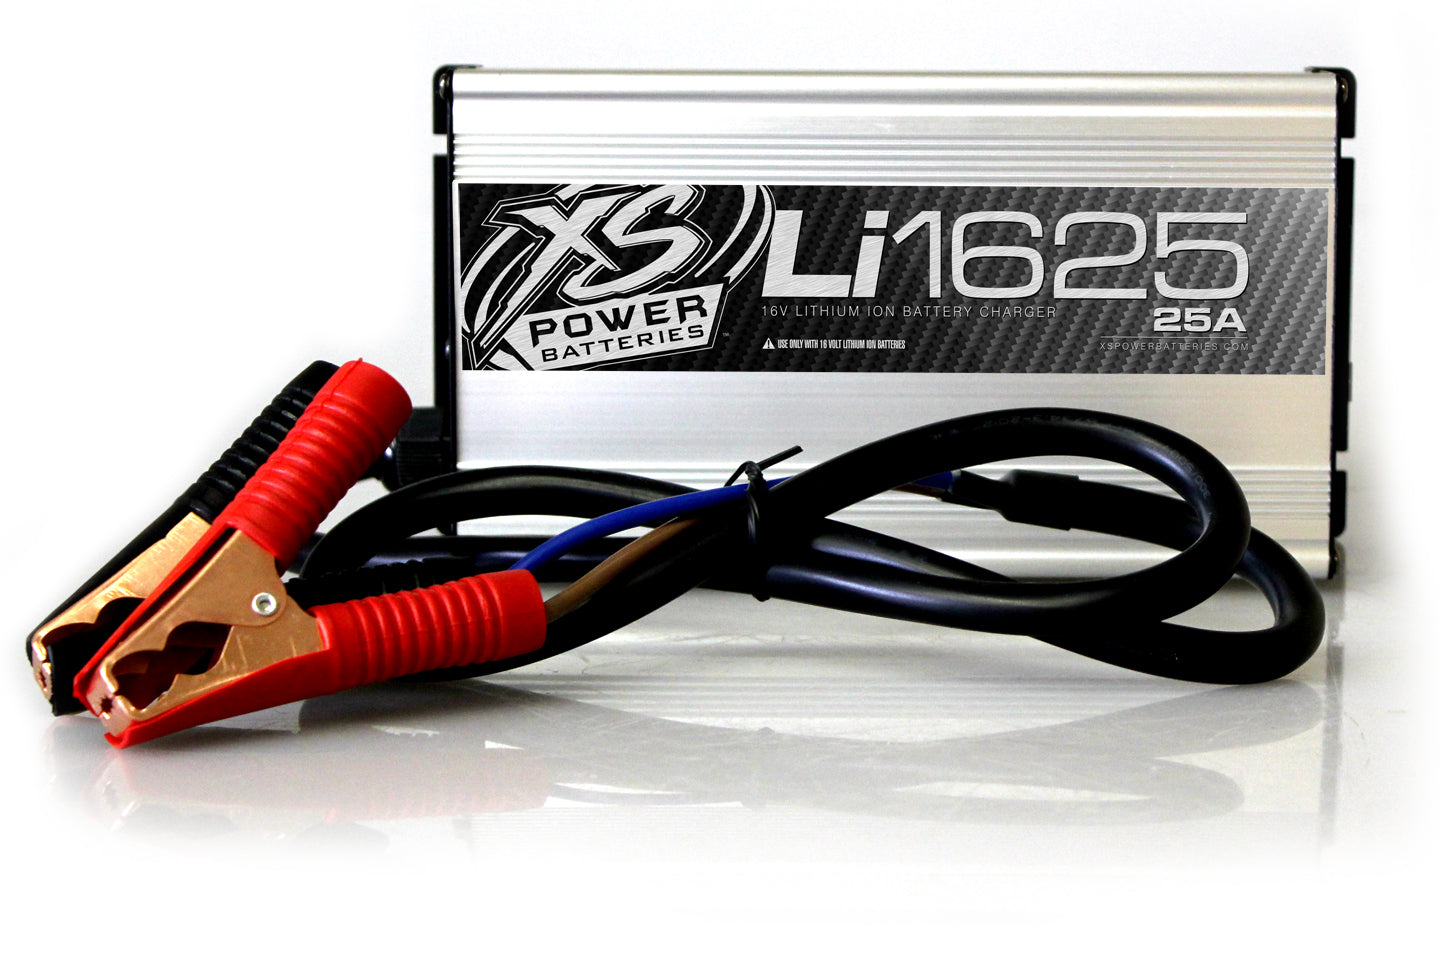 XS Power Li1625 16V Lithium Ion Vehicle Battery Charger 25A